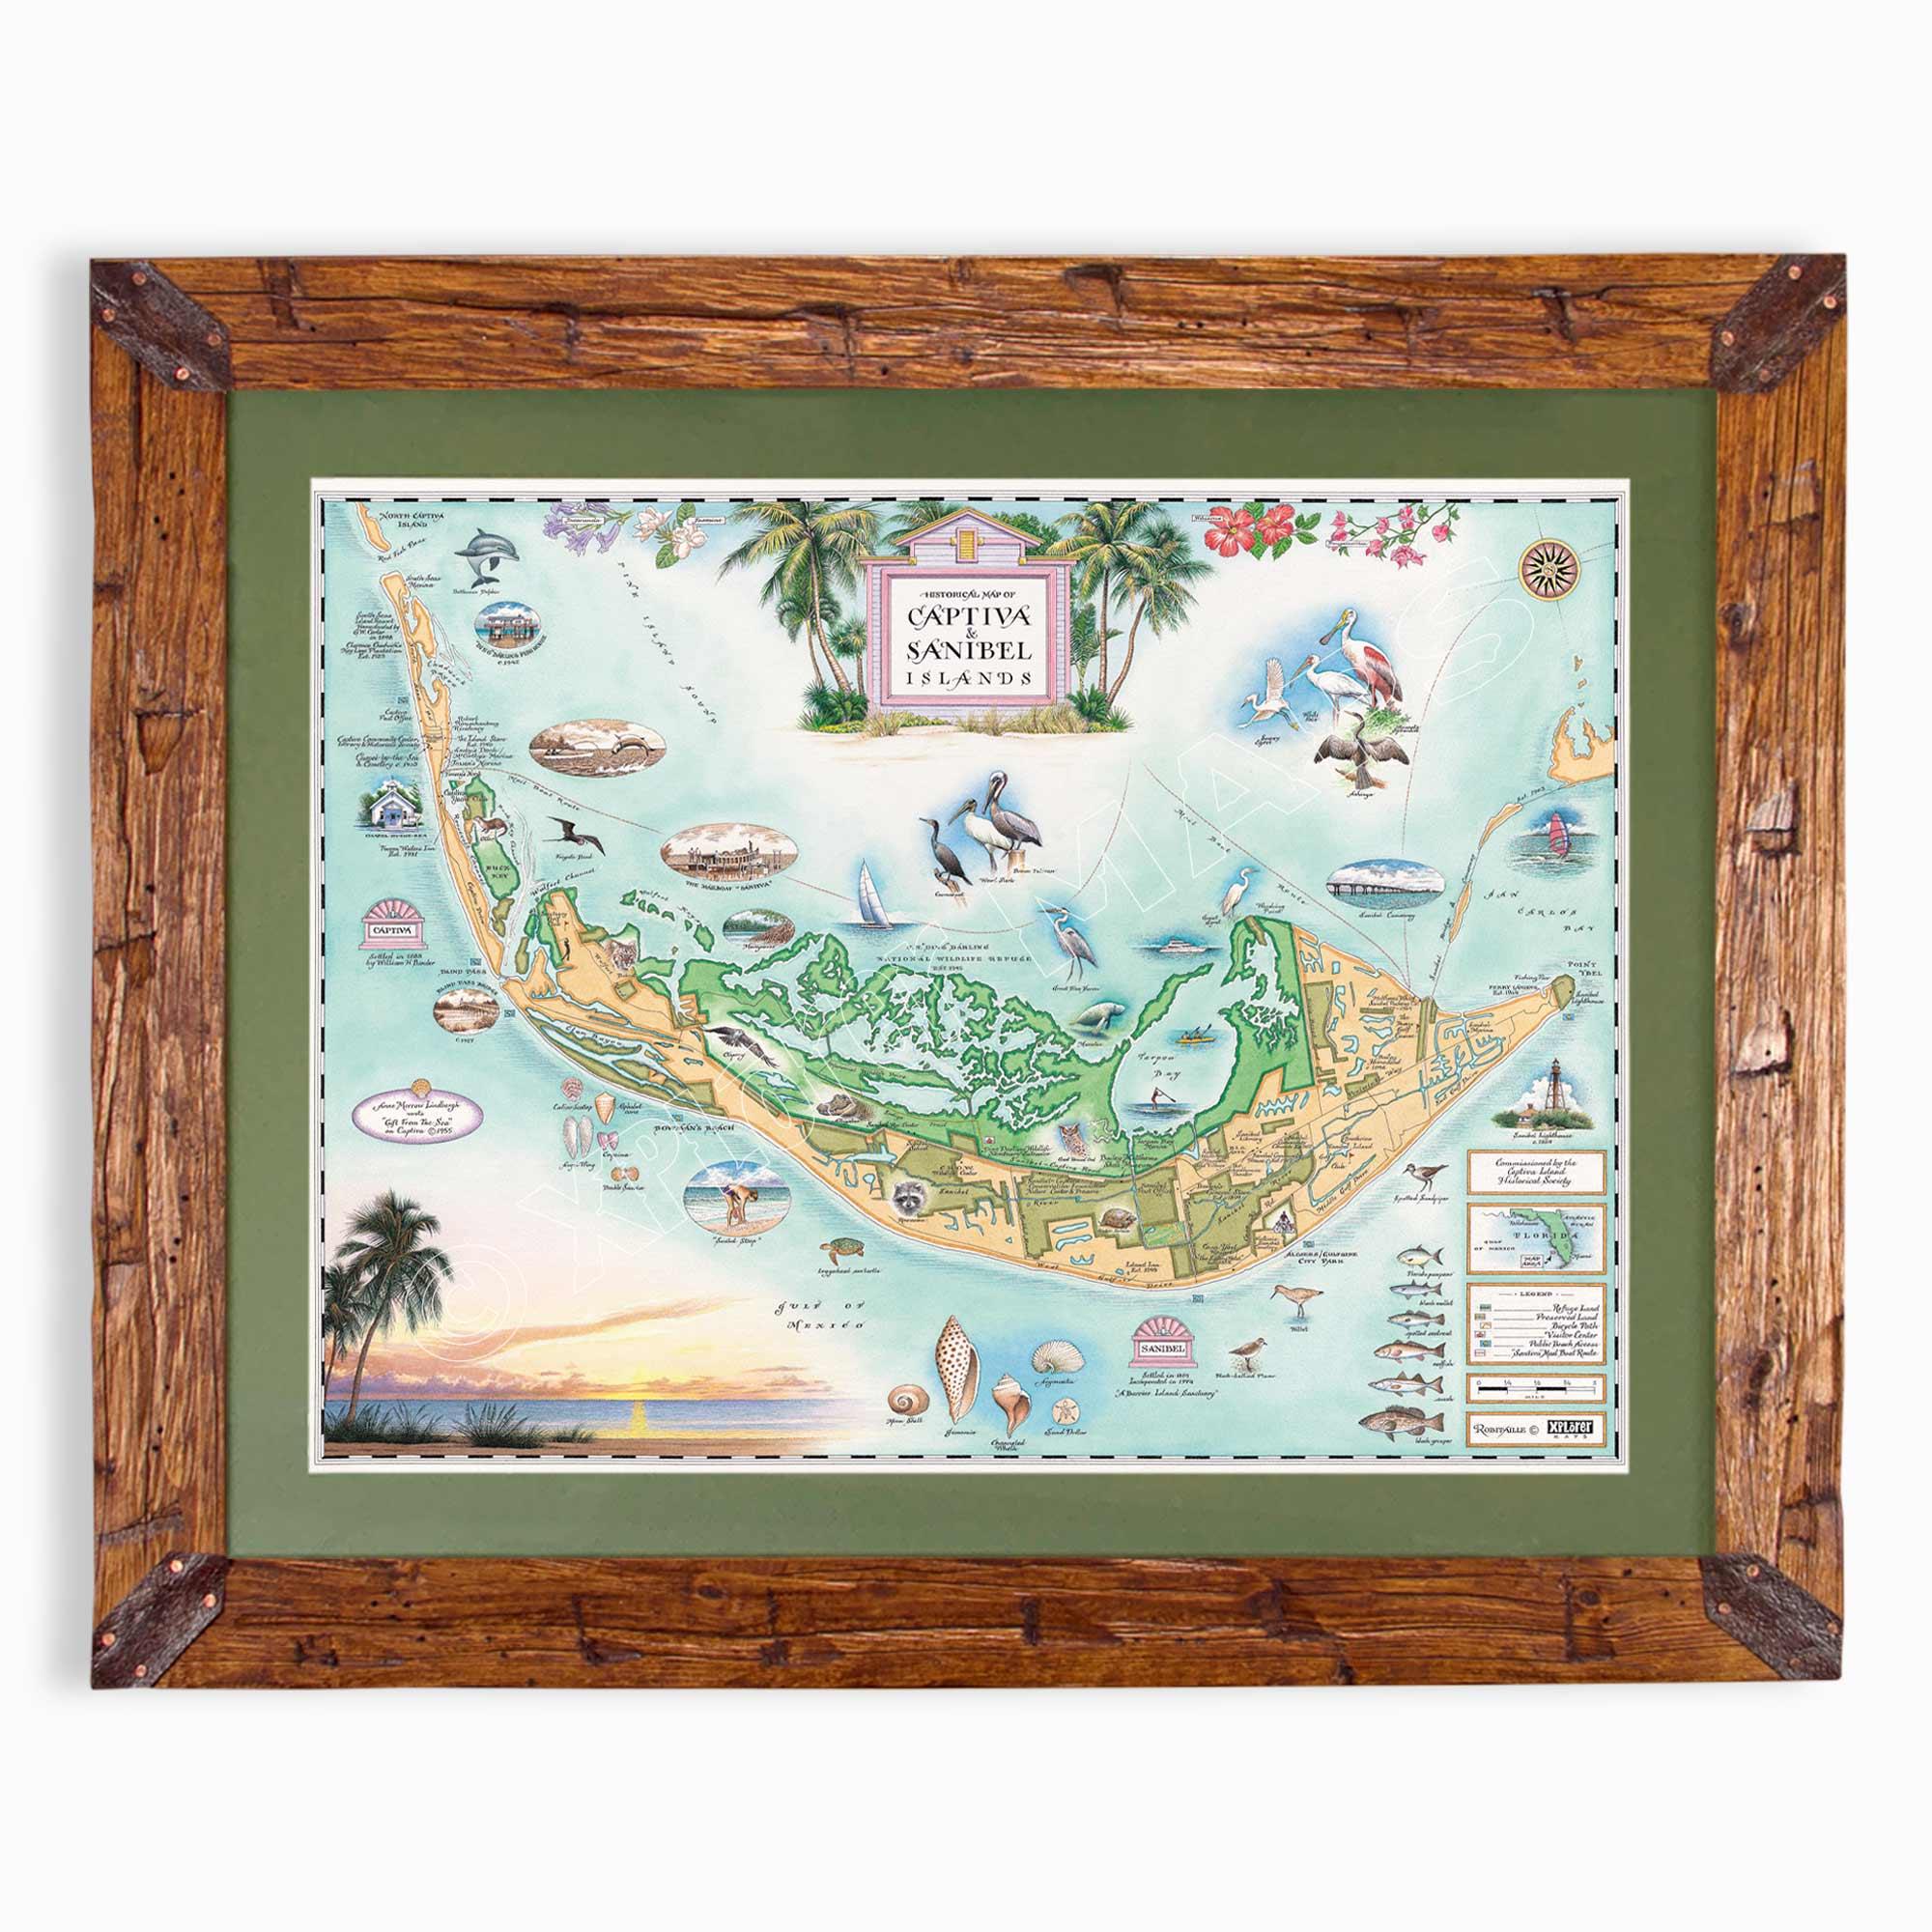 Sanibel & Captiva Islands hand-drawn map in earth tones blues and greens. The map print is framed in Montana hand-scraped pine with a green mat.